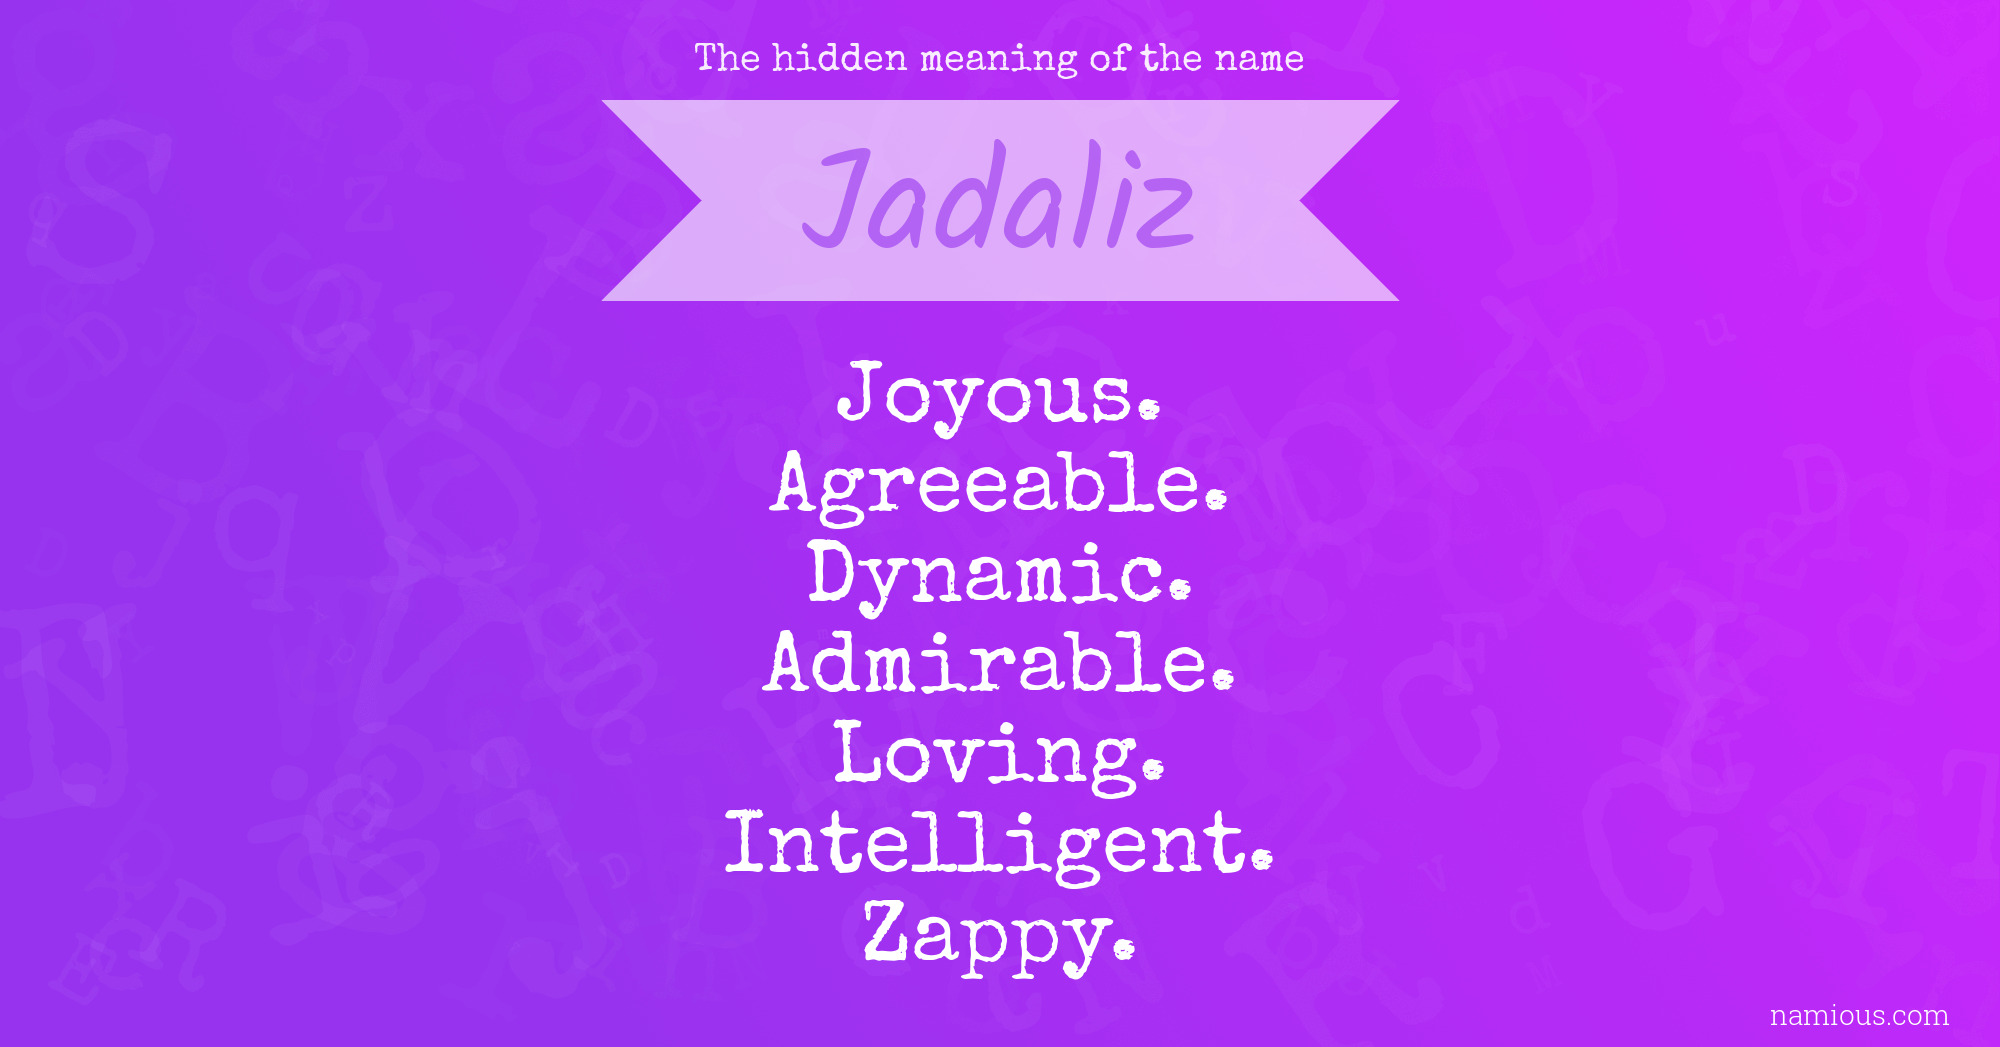 The hidden meaning of the name Jadaliz